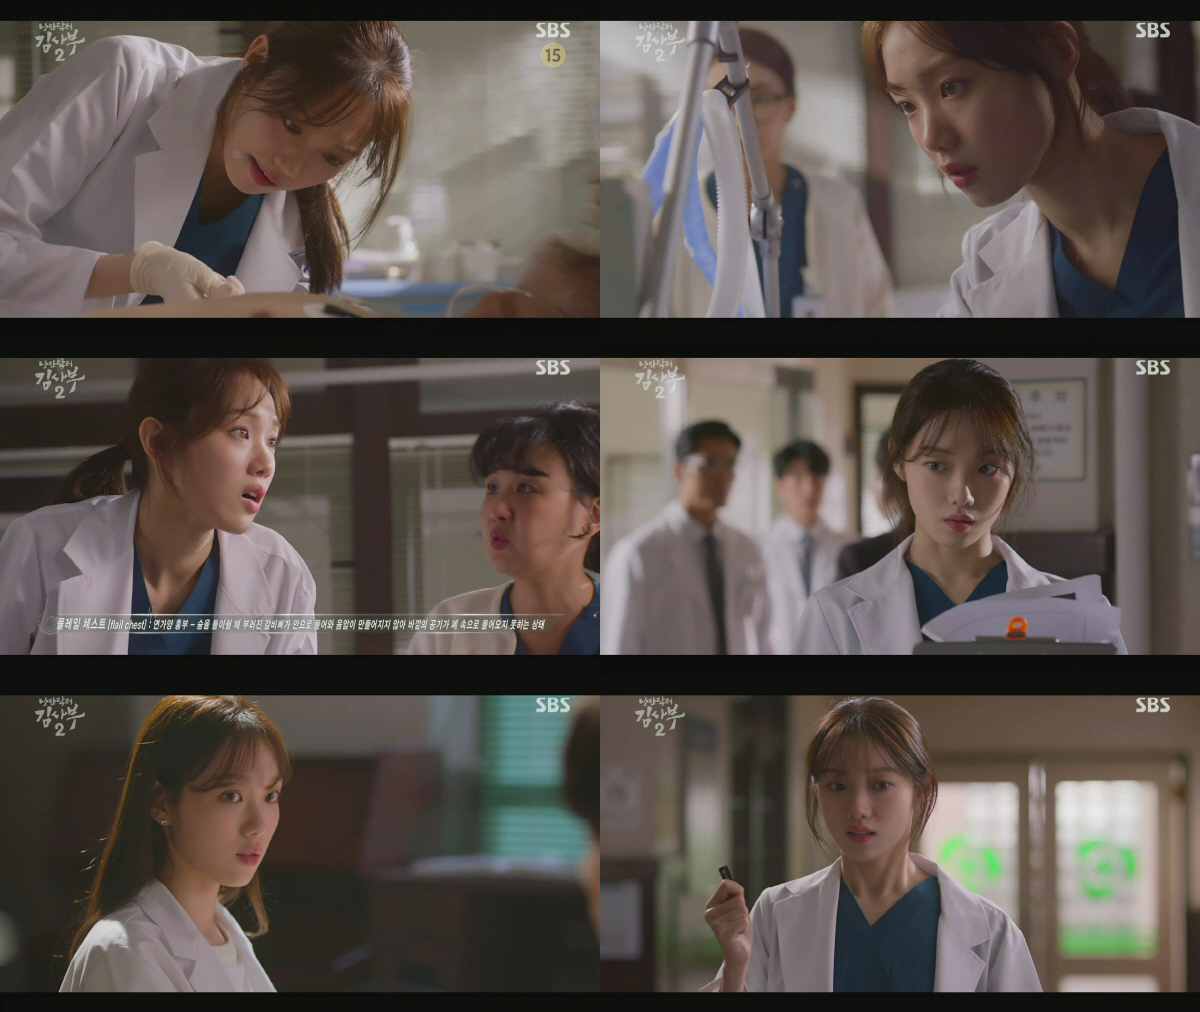 Romantic Doctor Kim Sabu 2 Lee Sung-kyung plays Cha Eun-jae is crossing the favor with Discomfort.In the 4th episode of SBSs monthly drama Romantic Doctor Kim Sabu 2 (played by Kang Eun-kyung and directed by Lee Gil-bok), Cha Eun-jae (Lee Sung-kyung) played a decisive role in saving Kim Sabu (Han Seok-gyu), who was in danger of suing even though he fell into Discomfort, suspecting his colleague Seo Woo Jin (Ahn Hyo-seop) He was shown to be re-emerged with a favorable feeling.There is interest in whether there will be The Big Picture of Romantic Doctor Kim Sabu 2 about Cha Eun-jae character who crosses the likability and Discomfort in one episode.On the same day, Seo Woo Jin entered the second operation of Professor Park Min-guk (Kim Joo-heon) as the instructions of Kim Sa-bu.The decision was made after Lee Sung-kyung failed to enter the operating room due to side effects after taking a tranquilizer.However, Cha Eun-jae misunderstood that Seo Woo Jin was trying to intercept his surgery and take the opportunity to return to his home, and he was angry with Seo Woo Jin.Cha Eun-jae shouted to Seo Woo Jin, You took it away, and It was an opportunity to go back to the main place, but you hit me and intercepted me. At the end of Seo Woo Jin, I did not want to go in, Cha said, If you are originally money, you are a friend and nothing is not.This opportunist, he said angrily.In addition, Cha Eun-jae, who brought the past to the past, said, If it was not that day, I would not be kicked out here.Seo Woo Jin said to such a car, Is it comforting if you turn it on the other side? However, the figure of Cha Eun-jae, who runs to the goal and doubts and drives the surrounding people, was seen as a discomfort to viewers.In particular, after taking a neurostable as a doctor, it was seen several times that he could not participate in surgery properly, and he was suspected of growing.It was Cha Eun-jae, who was falling to Discomfort, but he was able to dream of The Big Picture of growth again by saving Kim Sabu in the second half of the play.Park Min-guk and Yang Ho-joon (Ko Sang-ho) tried to cover it with Kim Sa-bu, who had performed the first surgery when the second surgery of the Korean Military Minister was wrong, and said that there was no recording of the surgery.However, Cha Eun-jae, who came across the existence of USB with the video, refused their proposal to send it to the main office if you keep the secret, and revealed all the facts in front of the son of Korea Military, giving excitement to viewers.Cha Eun-jae, who did not choose the means and methods to return to the main place, suddenly showed a change in mind and growing, and the reaction among viewers was changing into a favor.On the same day, Cha Eun-jae noticed that the patients symptoms were flail chest at once in an emergency situation, and he successfully completed the first aid treatment. He showed a quick response without shaking even in anxiety.Kim Sabu, who watched this, praised it as the first patient of yours.At the end of the broadcast, Cha Eun-jae apologized to Seo Woo Jin, who was angry with him, and tried to restore the relationship.It is a tea that was drawn as Discomfort earlier, but it has gradually laid the foundation for growth by overcoming and changing its shortcomings, mistakes and mistakes.In one episode, there is a growing expectation that Cha Eun-jae, who crosses the favor with Discomfort, will receive full support from viewers.The 4th Romantic Doctor Kim Sabu 2 recorded 19.9% of Nielsen Korea nationwide, marking its highest audience rating.